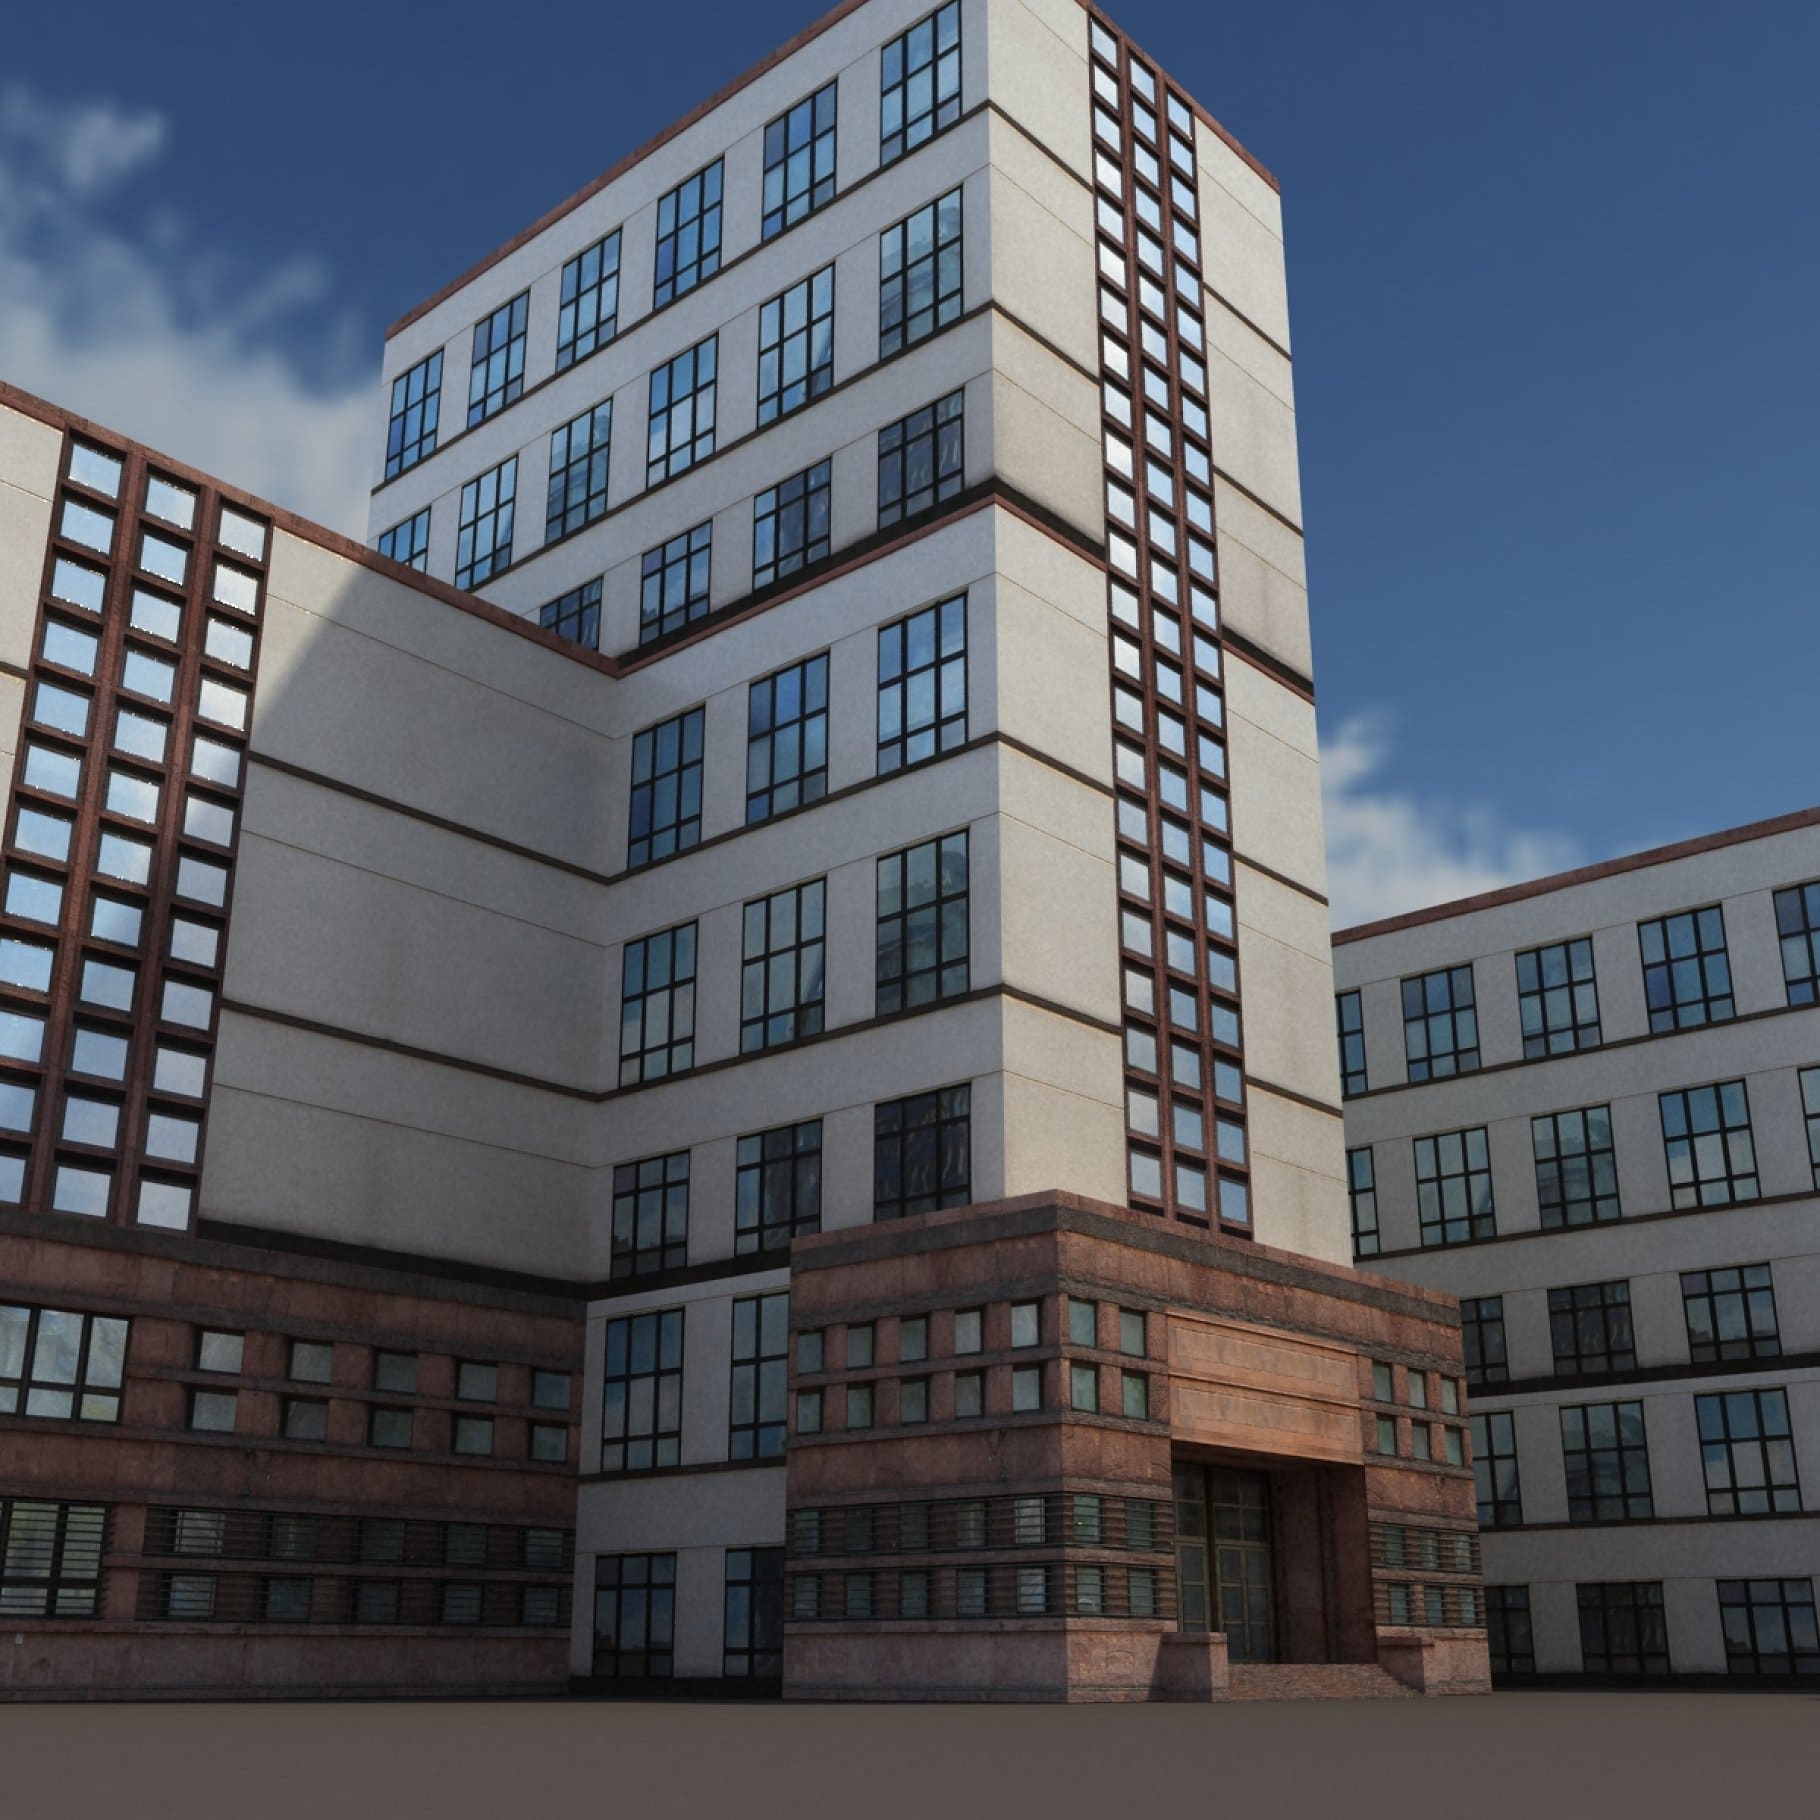 3D model of an eight-story office building.